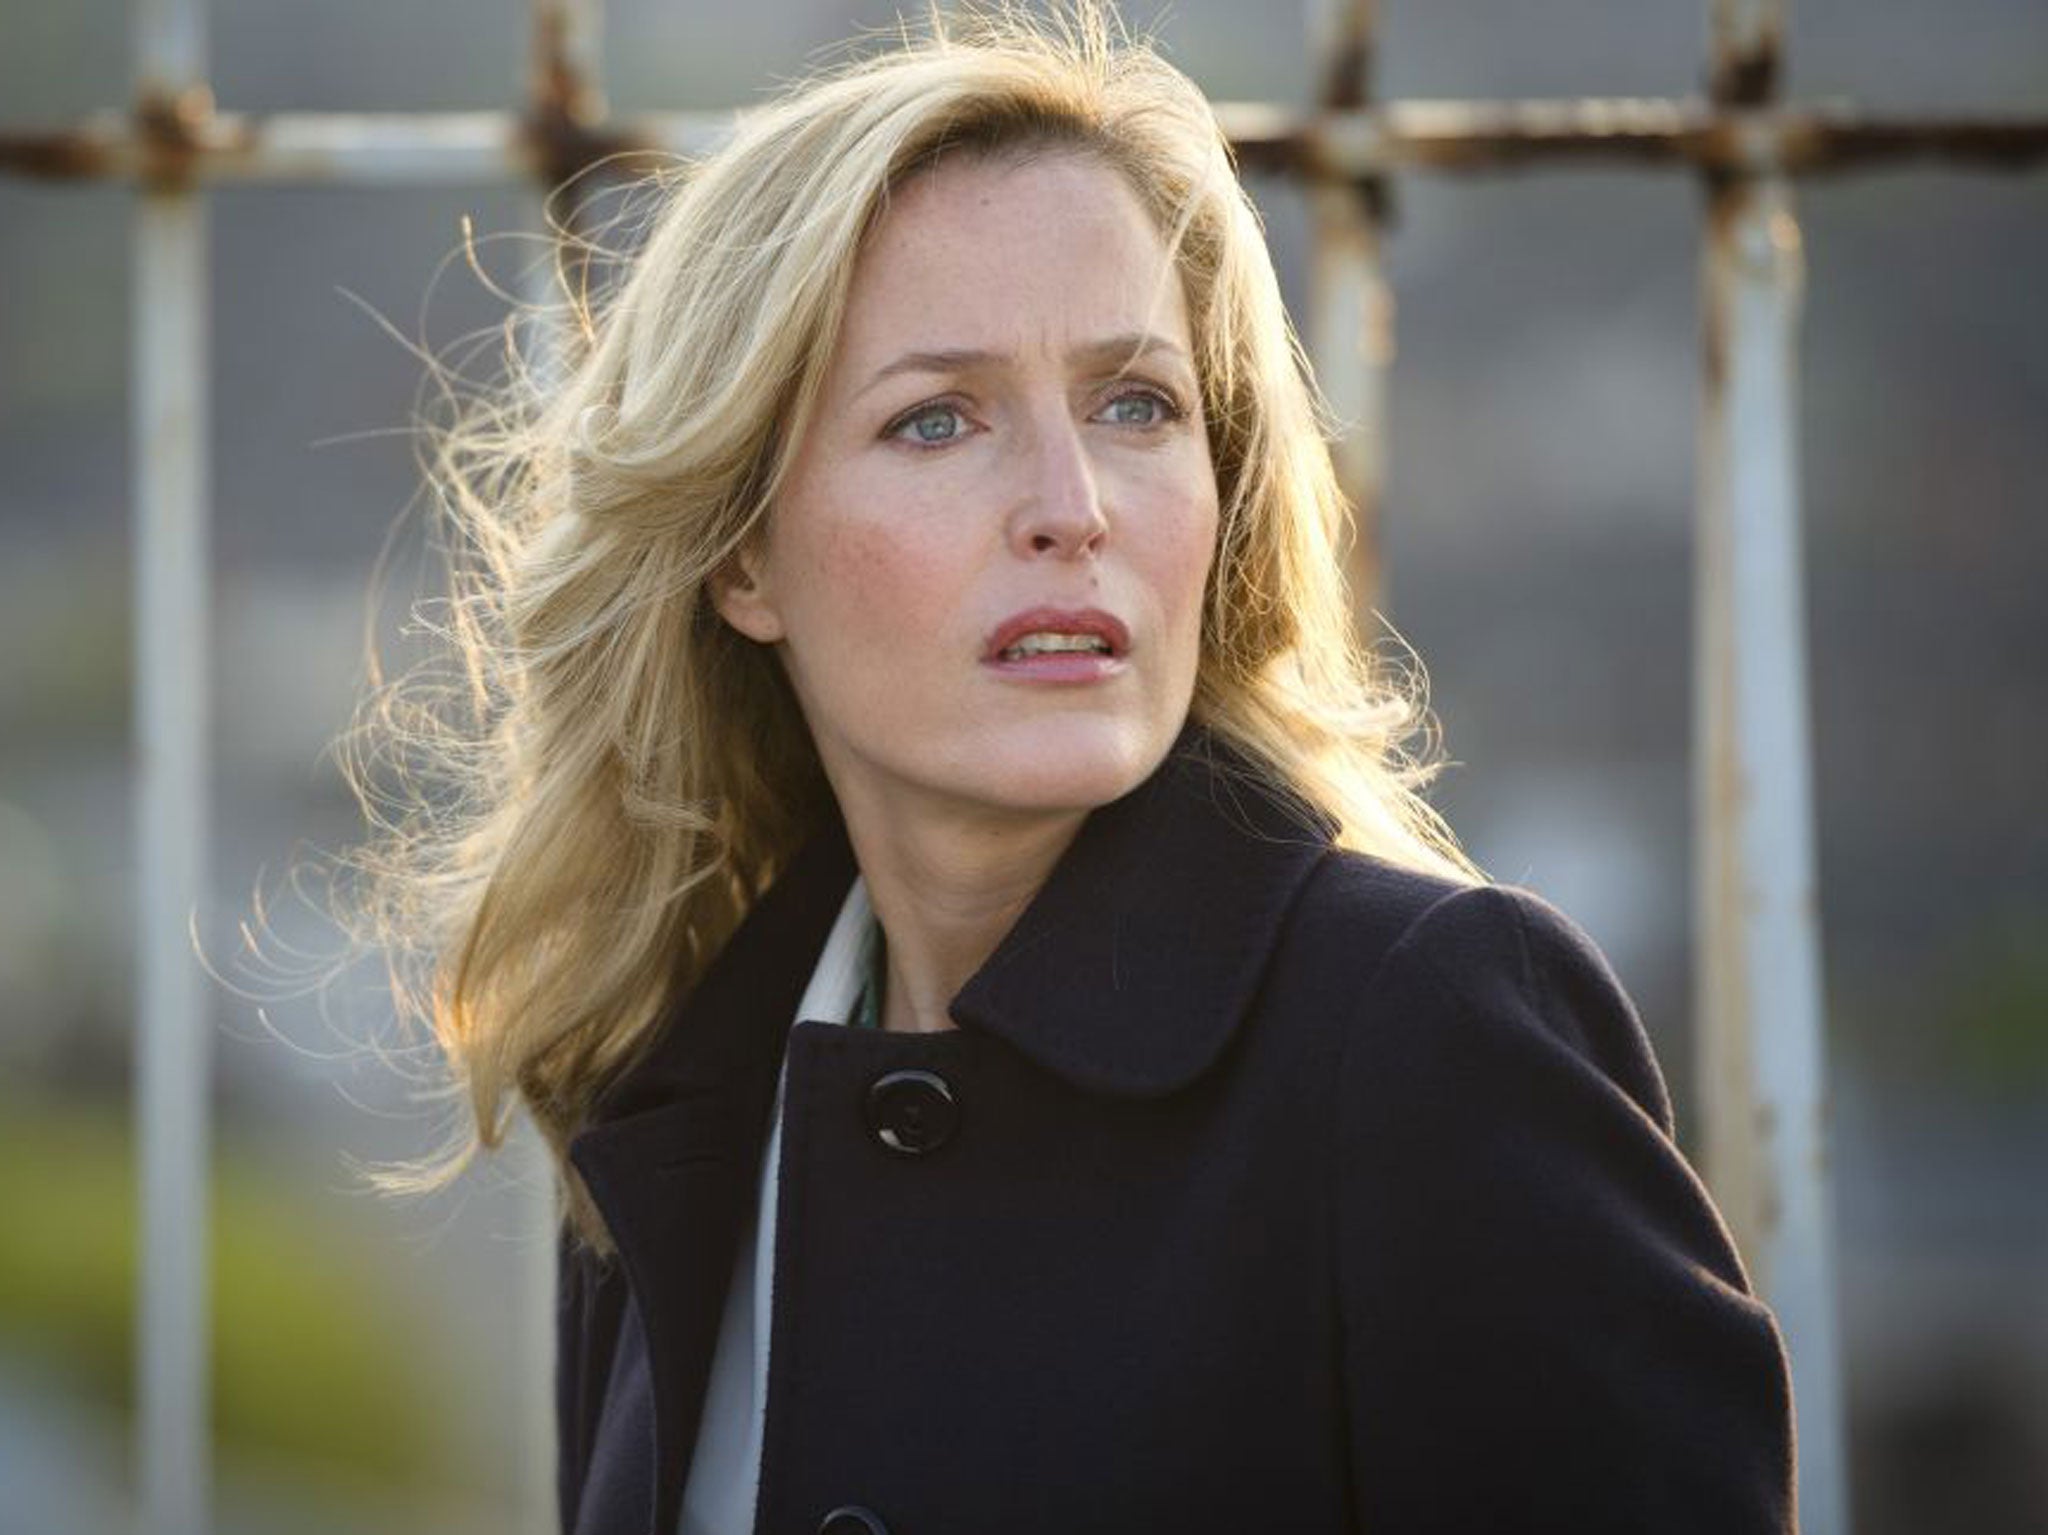 DSI Stella Gibson (Gillian Anderson) in The Fall on BBC Two